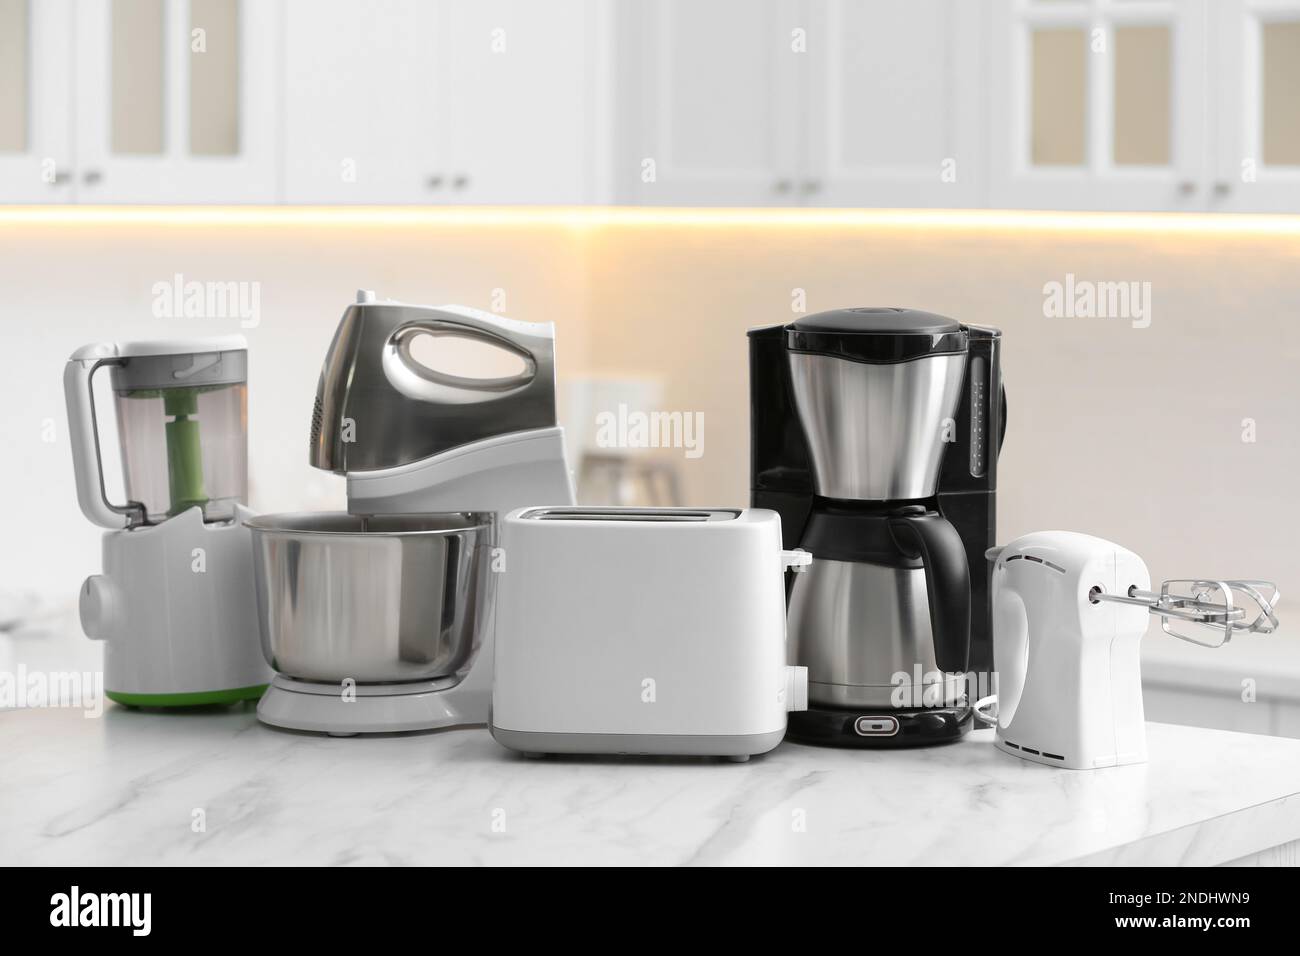 Group Household Appliances Kitchen Toaster Coffee Maker Microwave Food  Processor Stock Photo by ©MaR1Art1 247061936